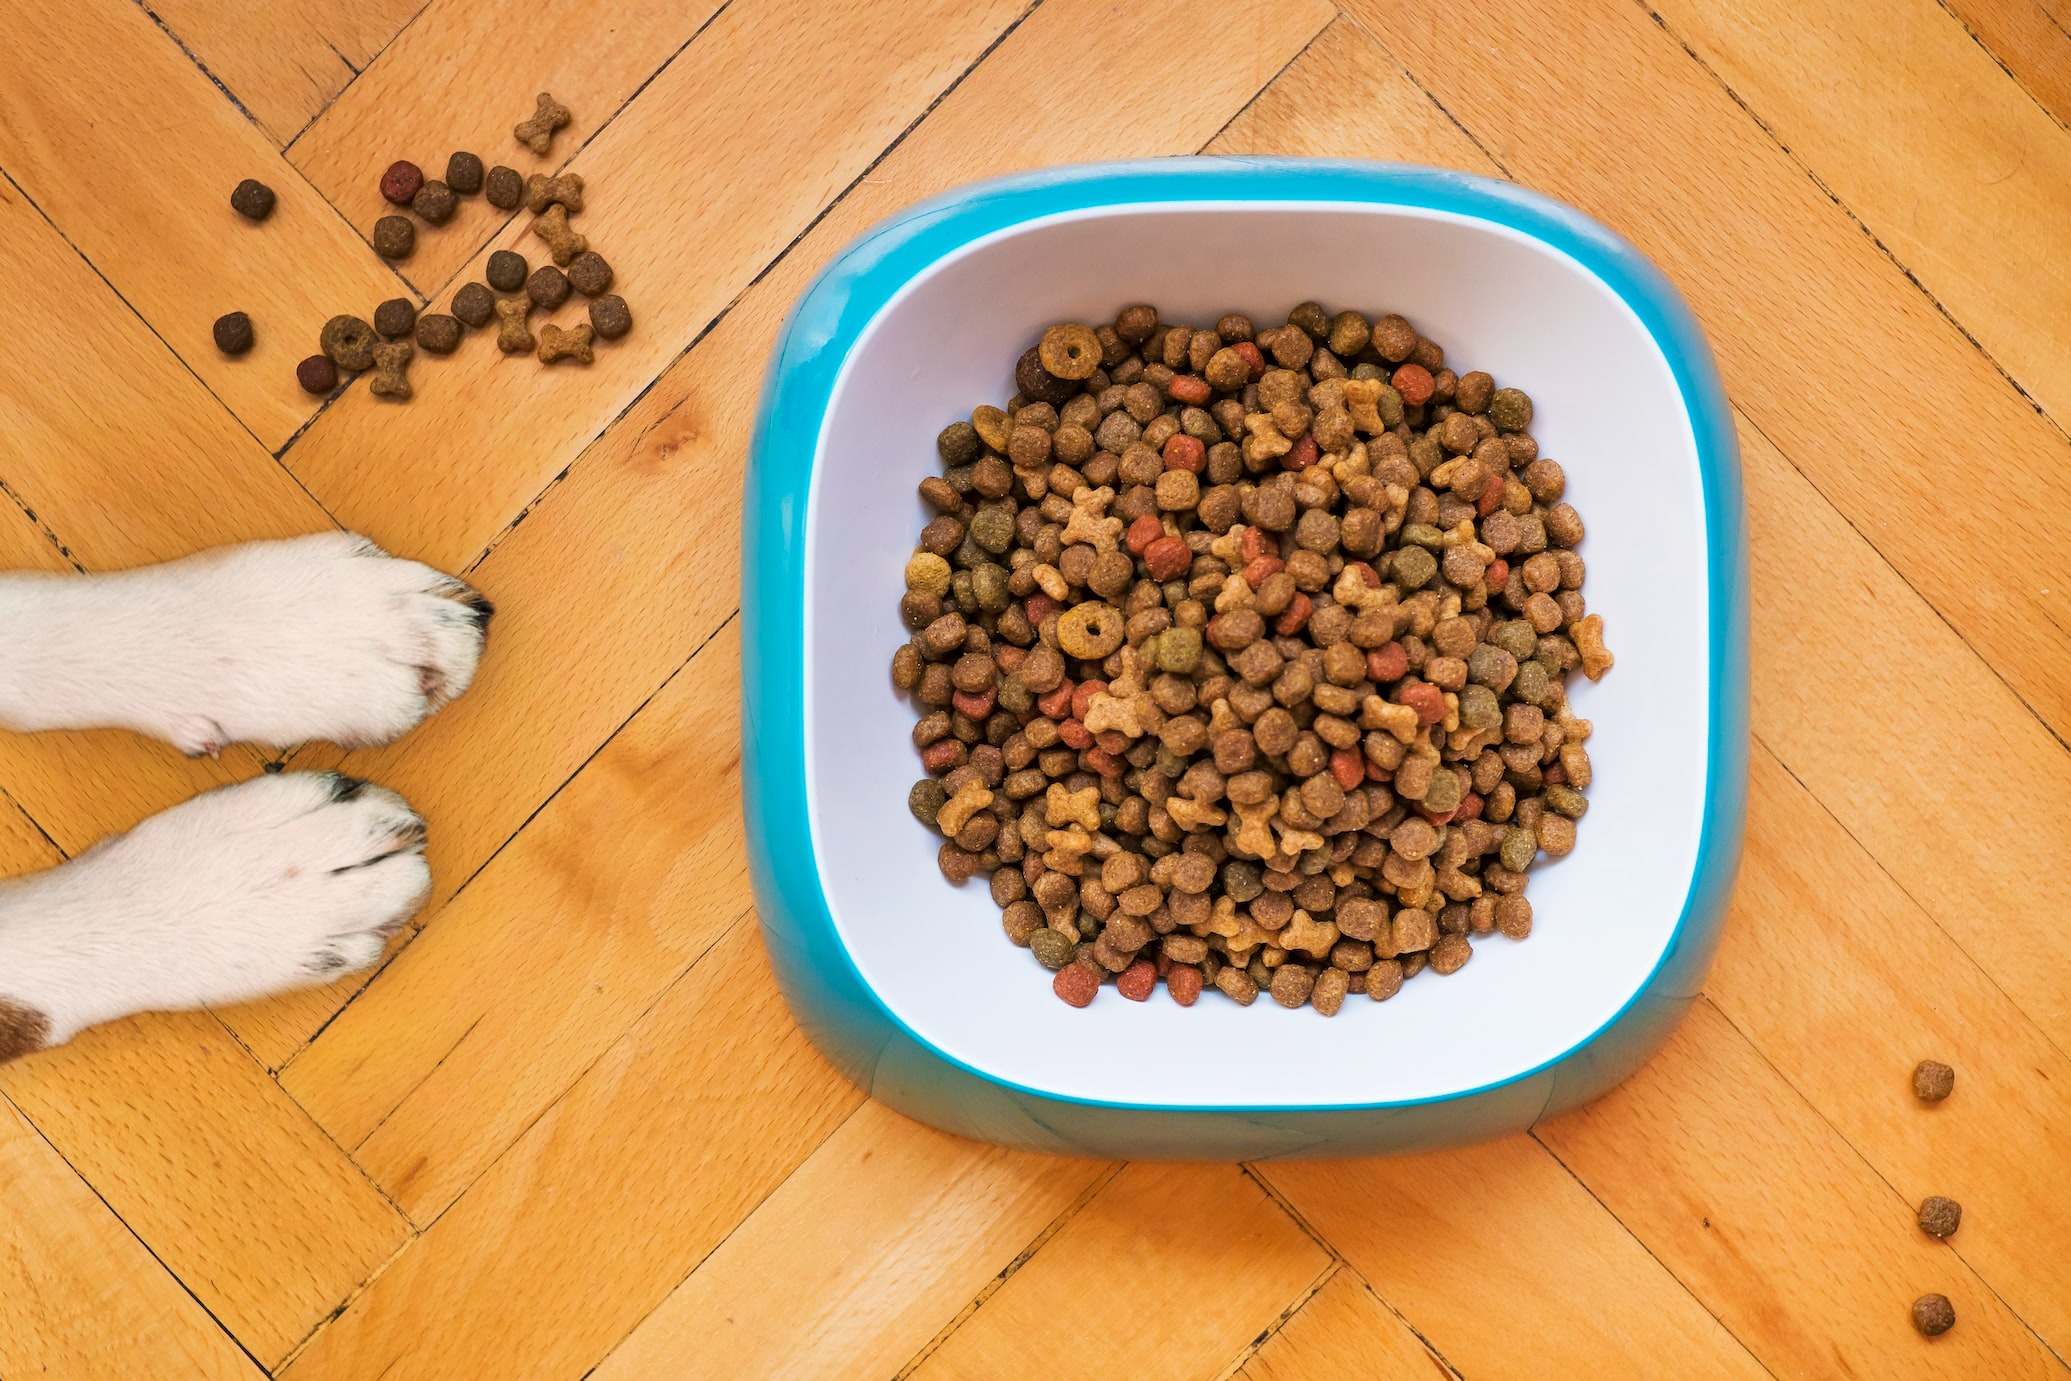 puppy paws next to a food bowl on wooden flooring